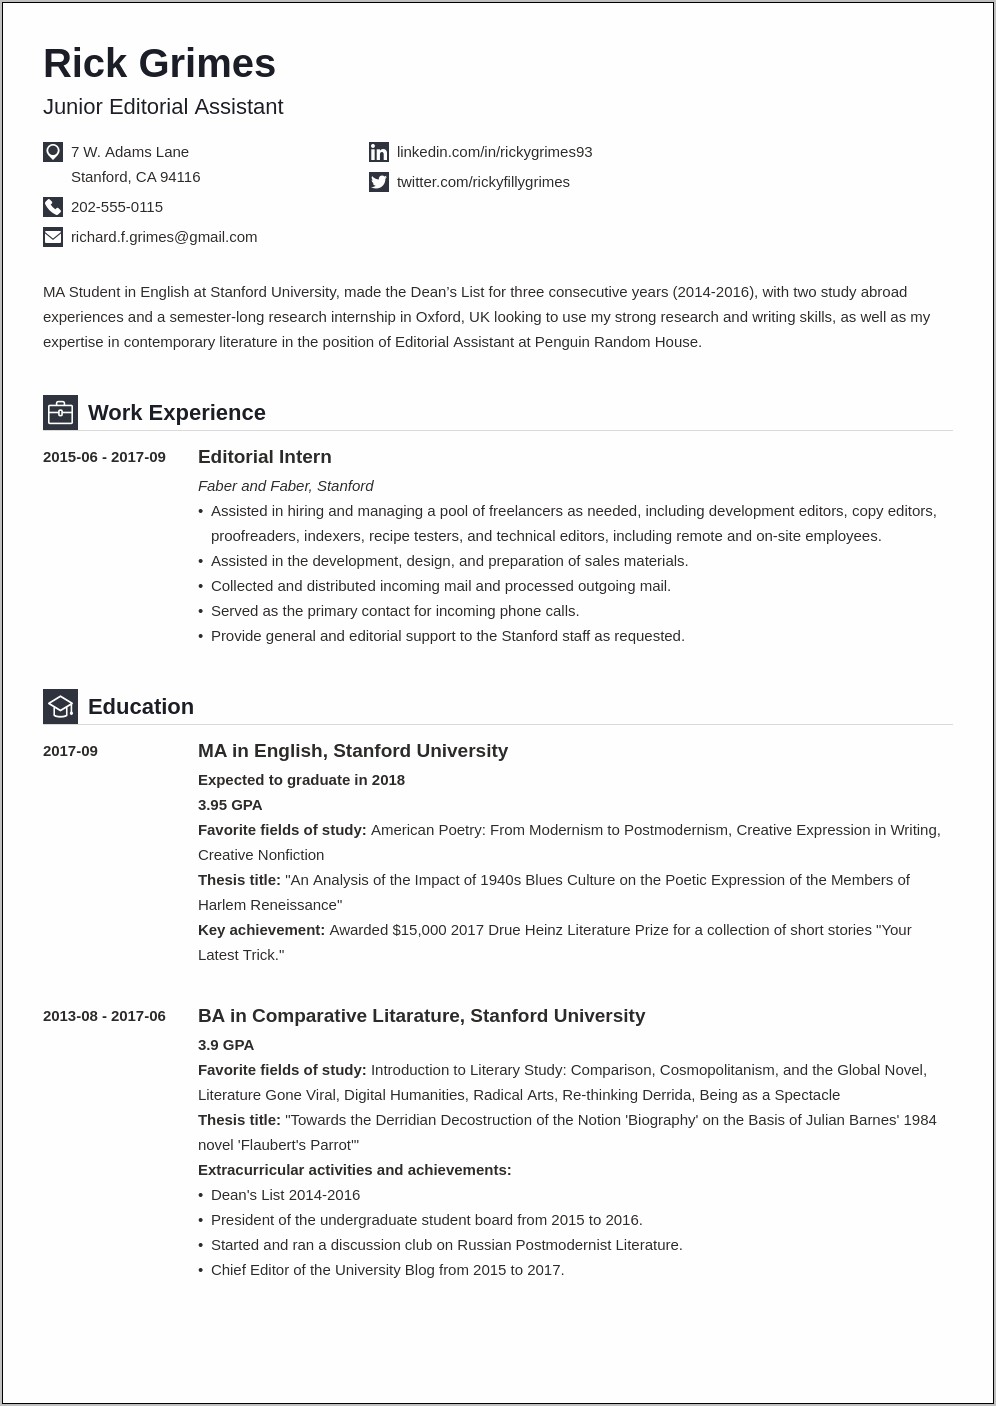 resume examples for college transfer students